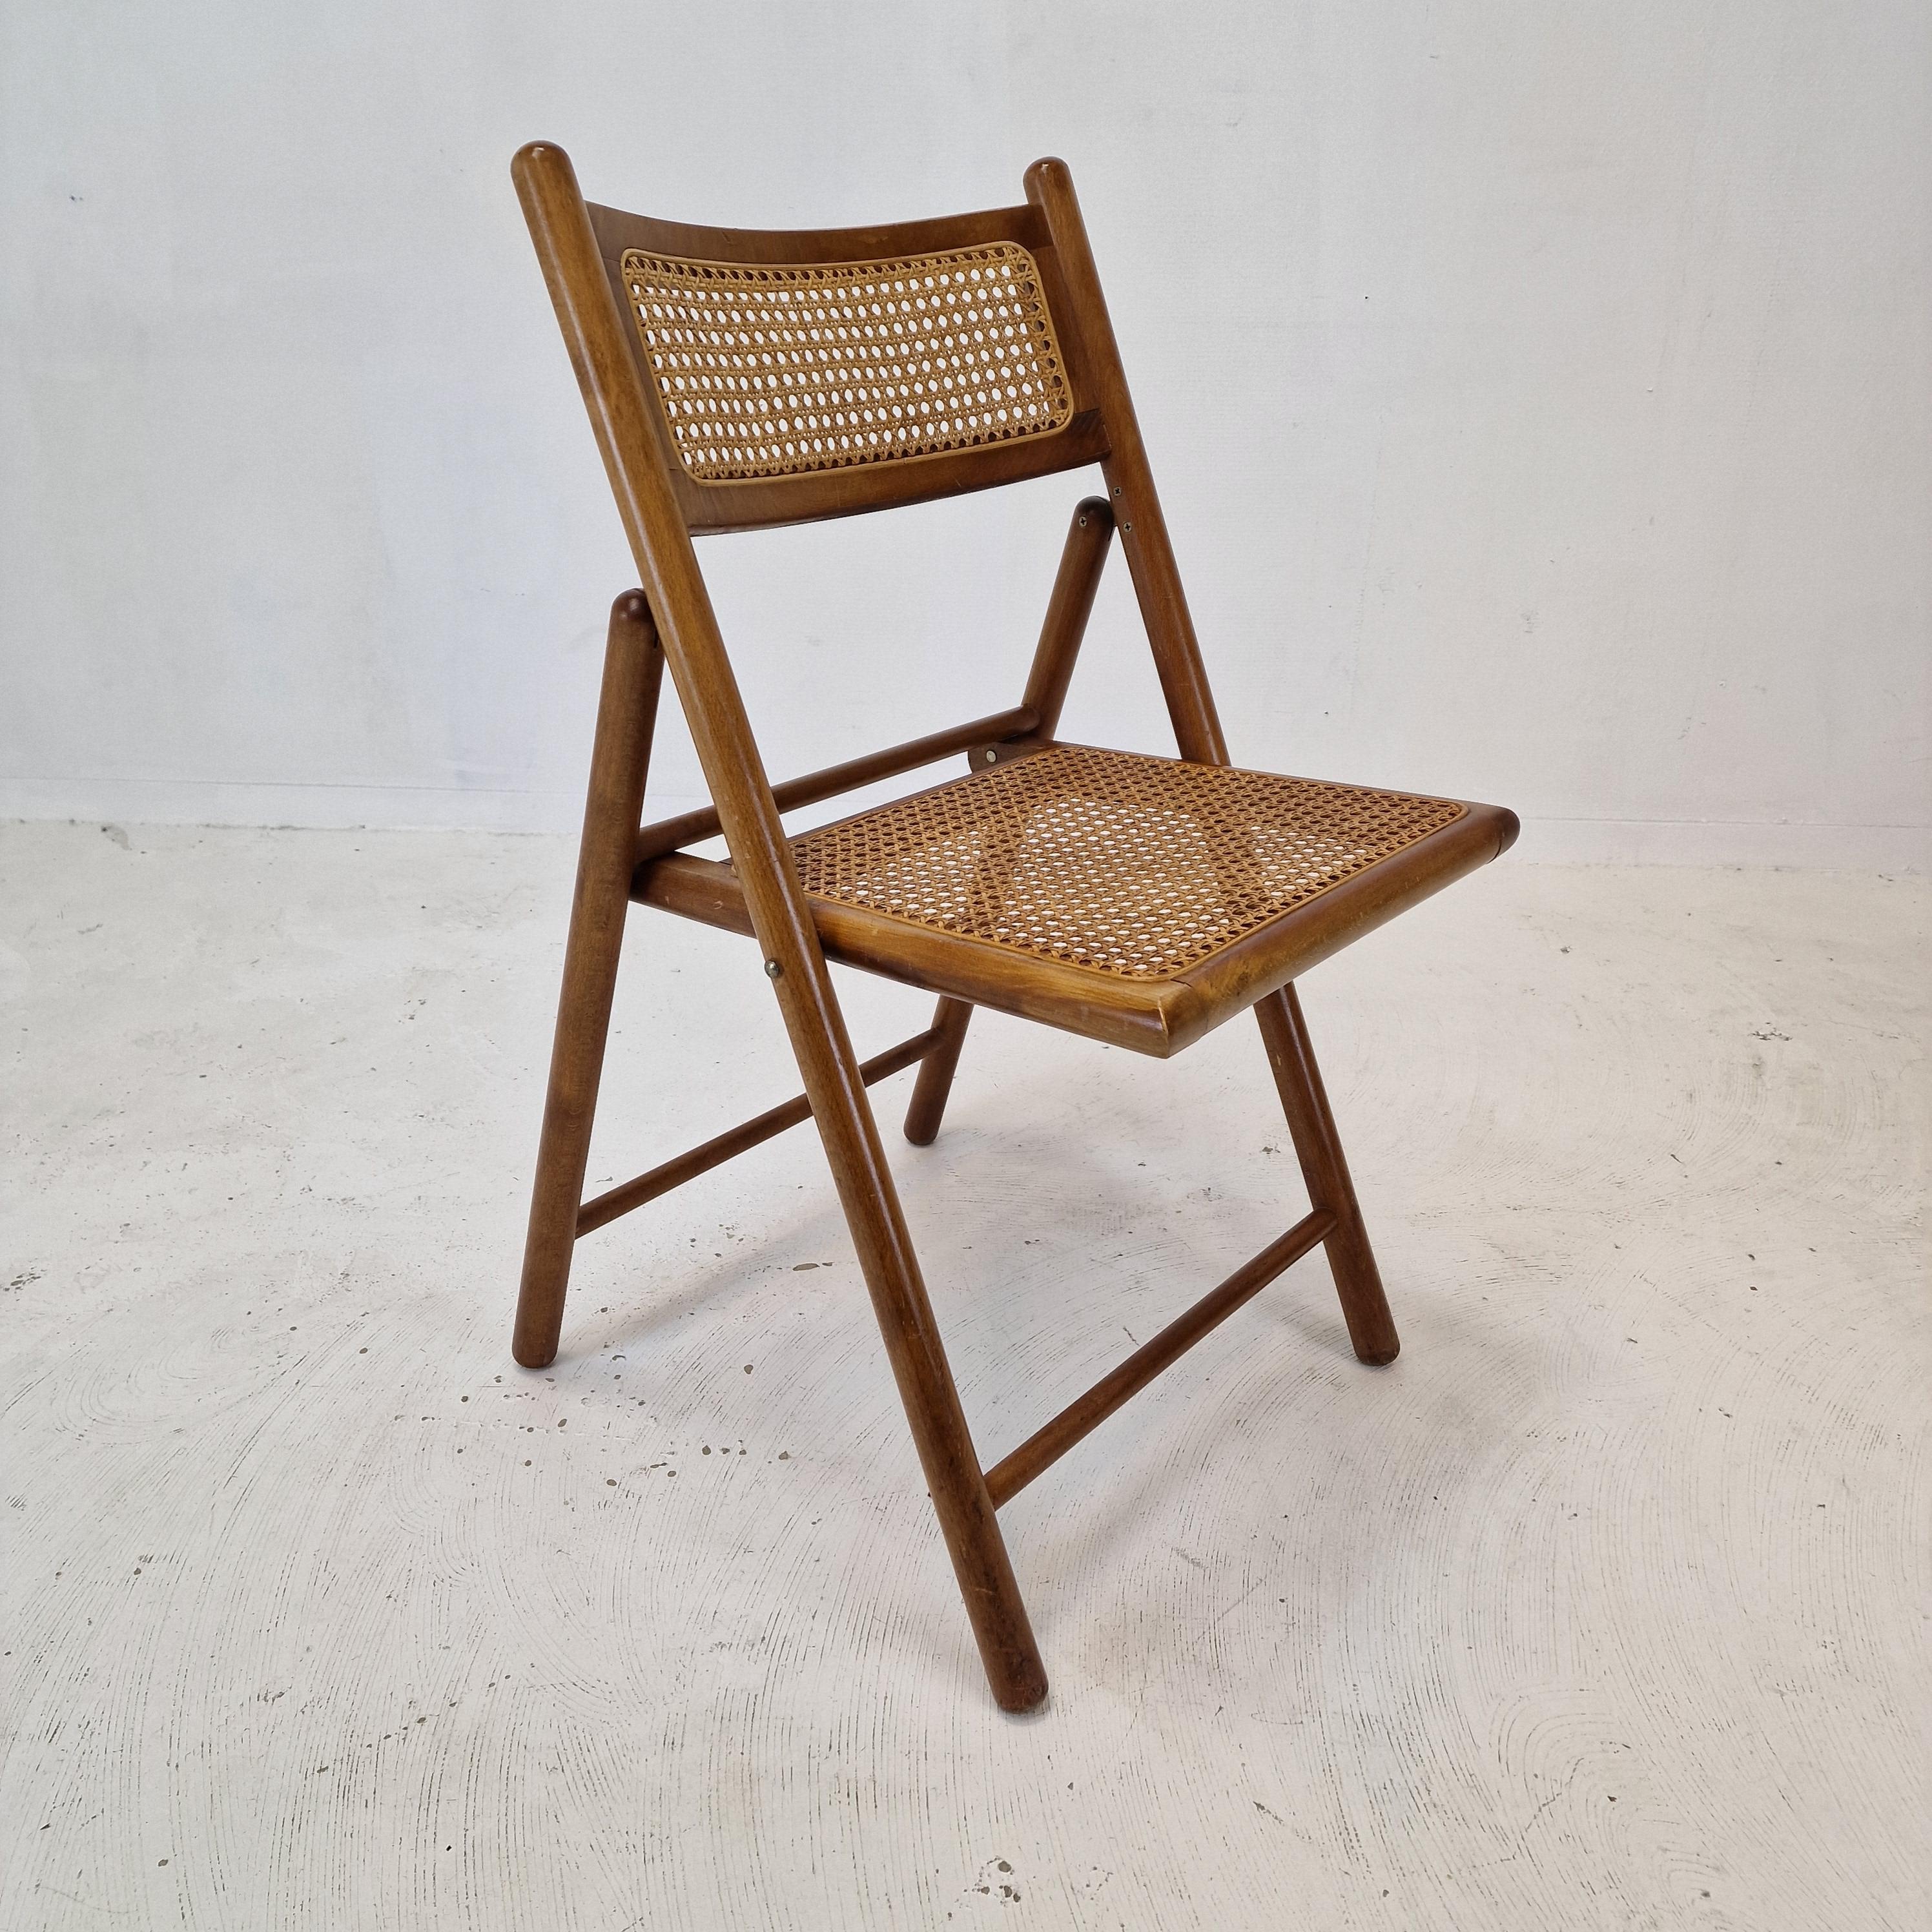 Wicker Set of 4 Italian Folding Chairs with Rattan, 1980s For Sale